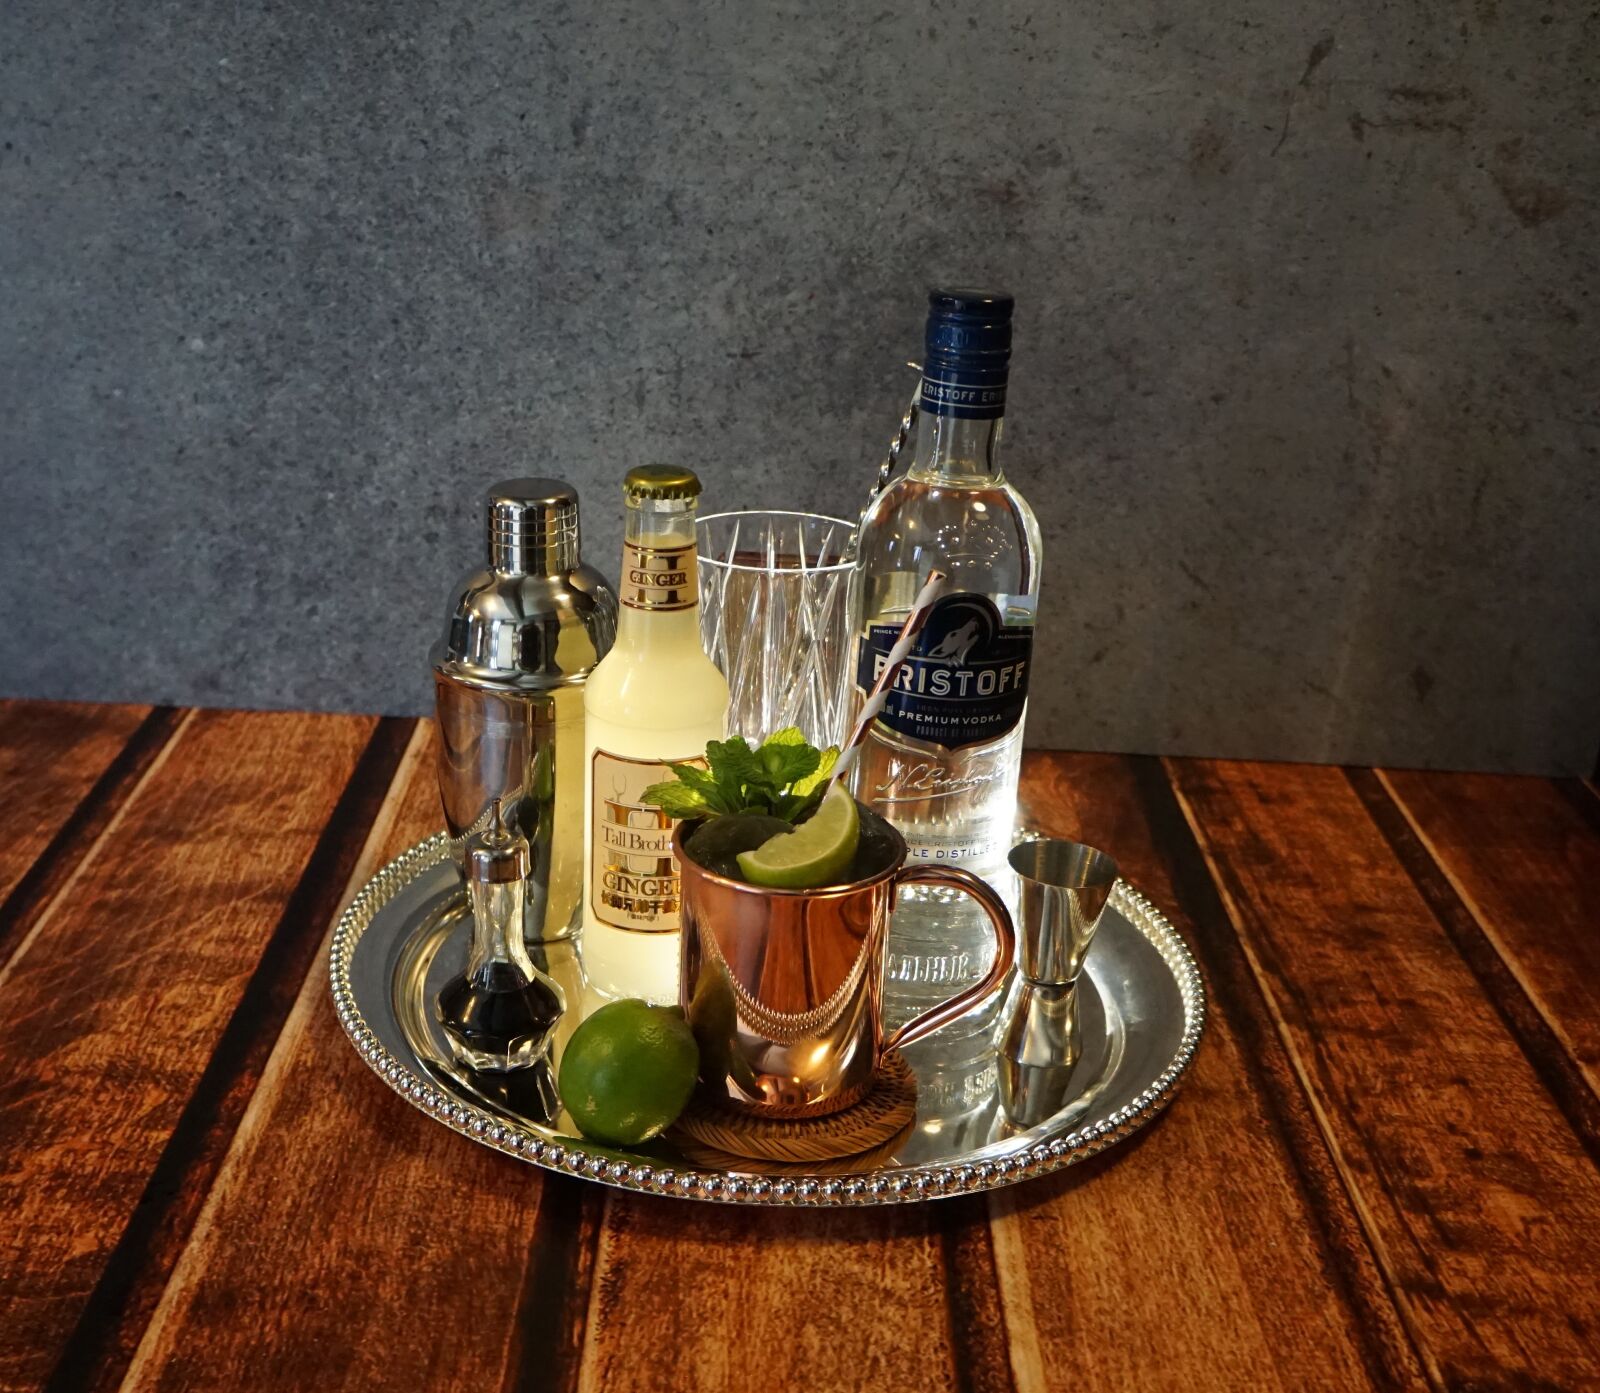 Sony a6000 sample photo. Cocktail, moscow mule, service photography